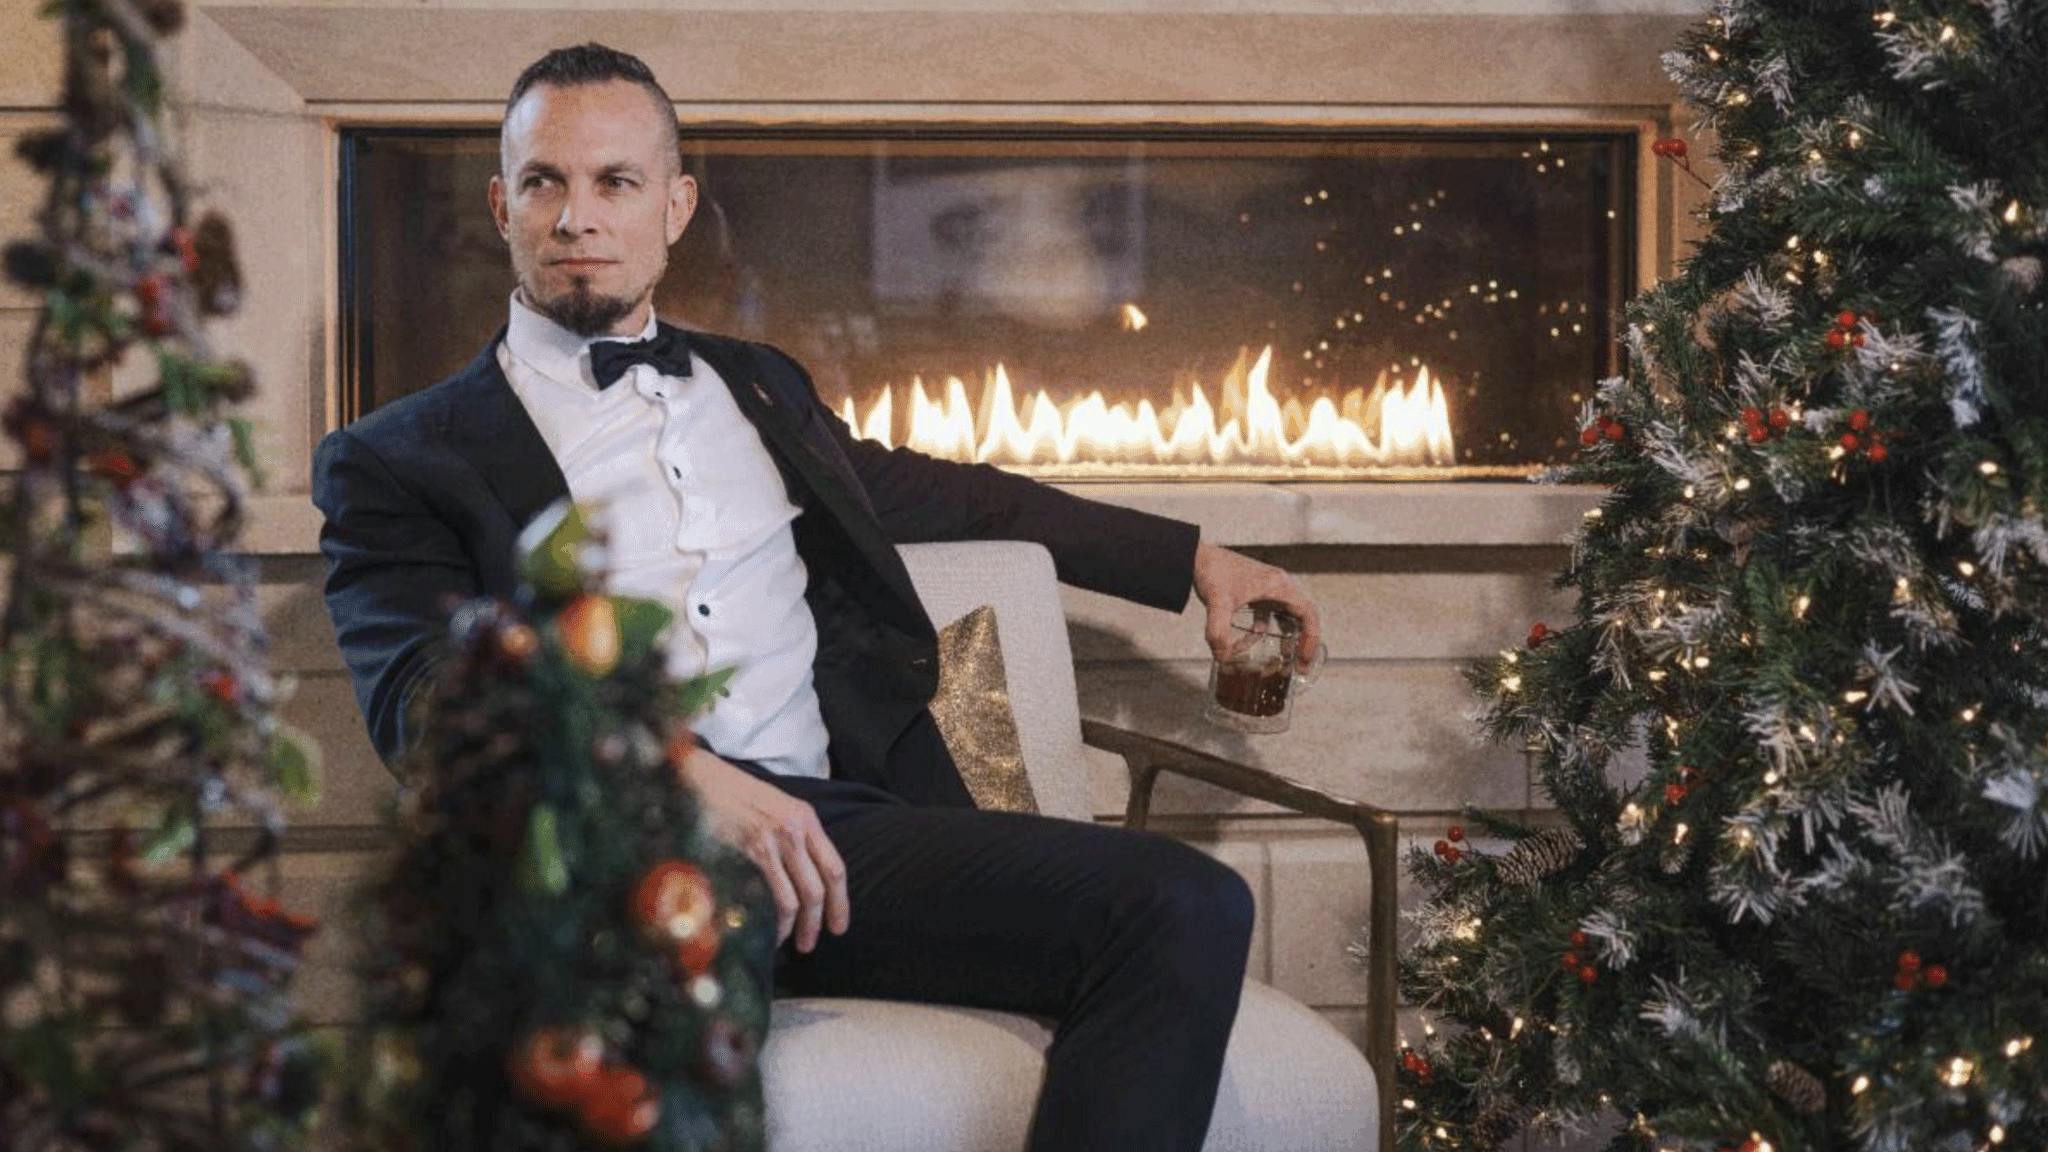 Alter Bridge’s Mark Tremonti will be releasing a Christmas album this year